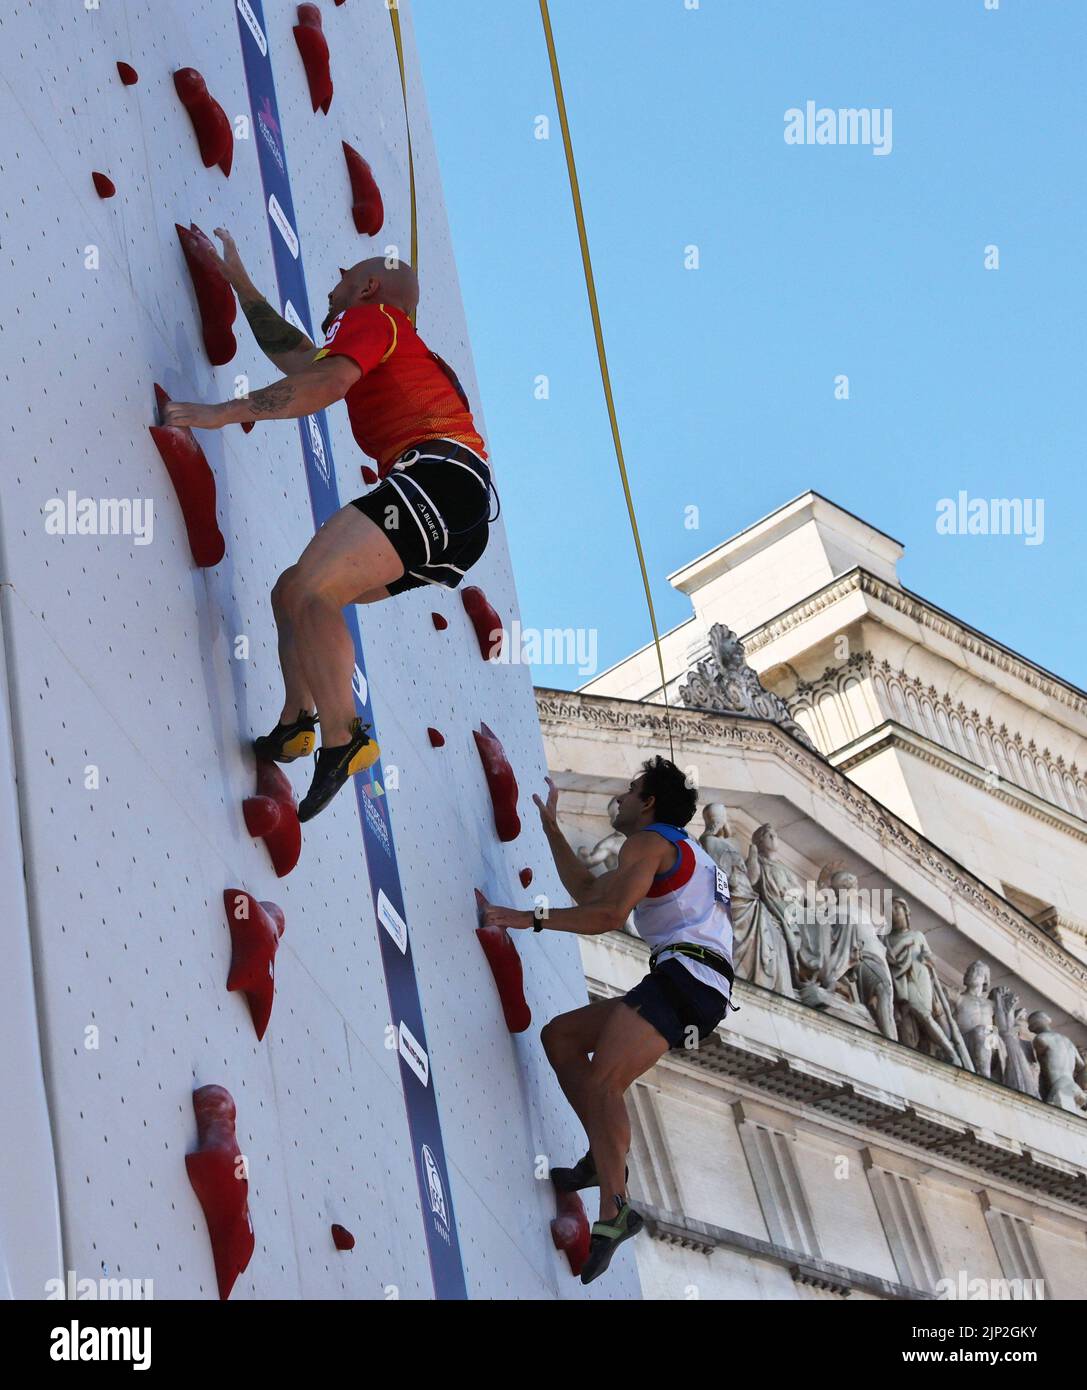 2022 European Championships - Sport Climbing - Konigsplatz, Munich, Germany - August 15, 2022 Spain's Erik Paulo Noya Cardon and Italy's Alessandro Boulos in action during the men's speed final REUTERS/Wolfgang Rattay Stock Photo